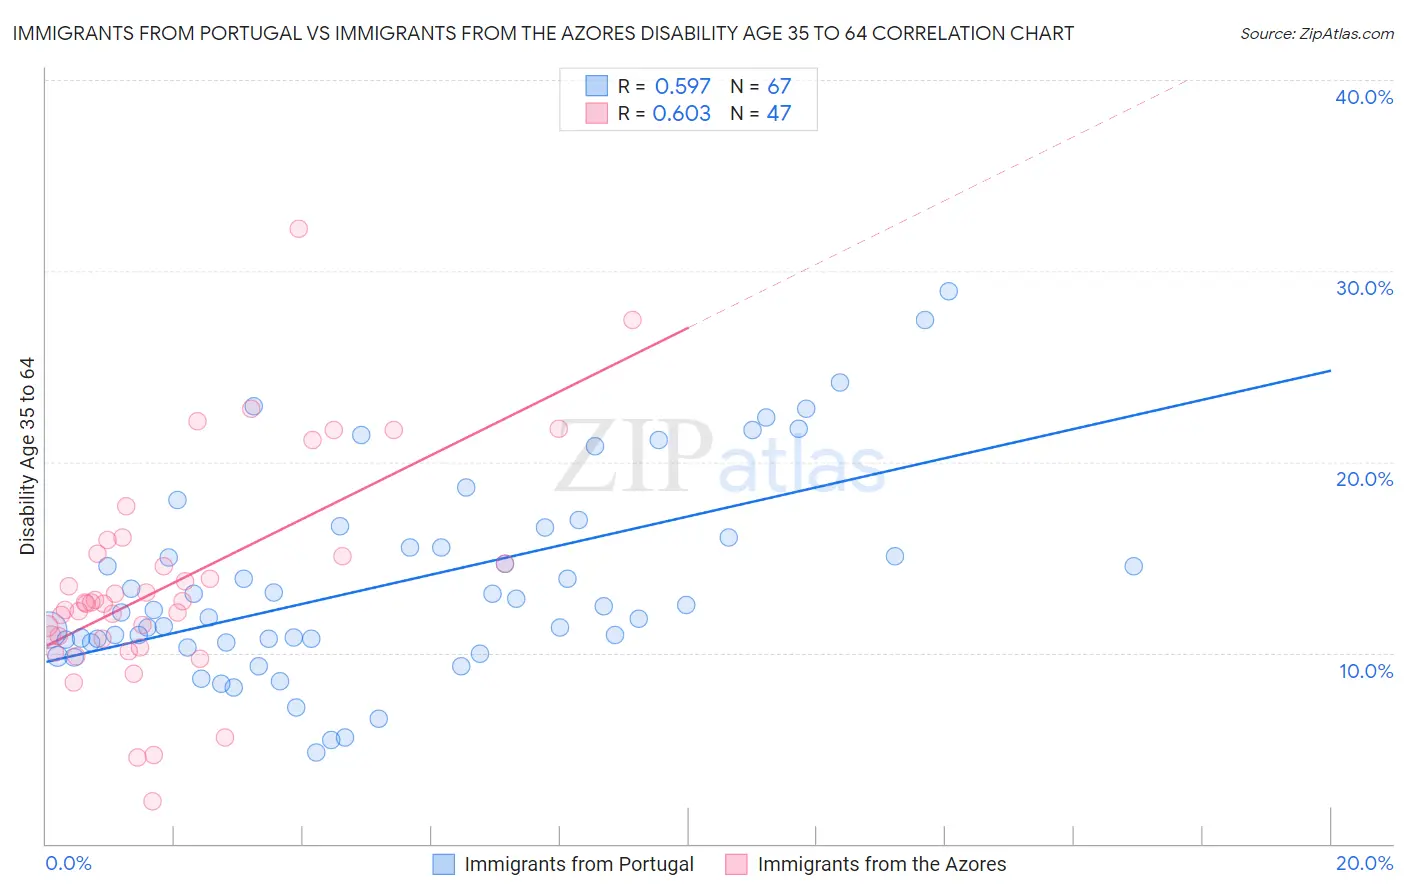 Immigrants from Portugal vs Immigrants from the Azores Disability Age 35 to 64